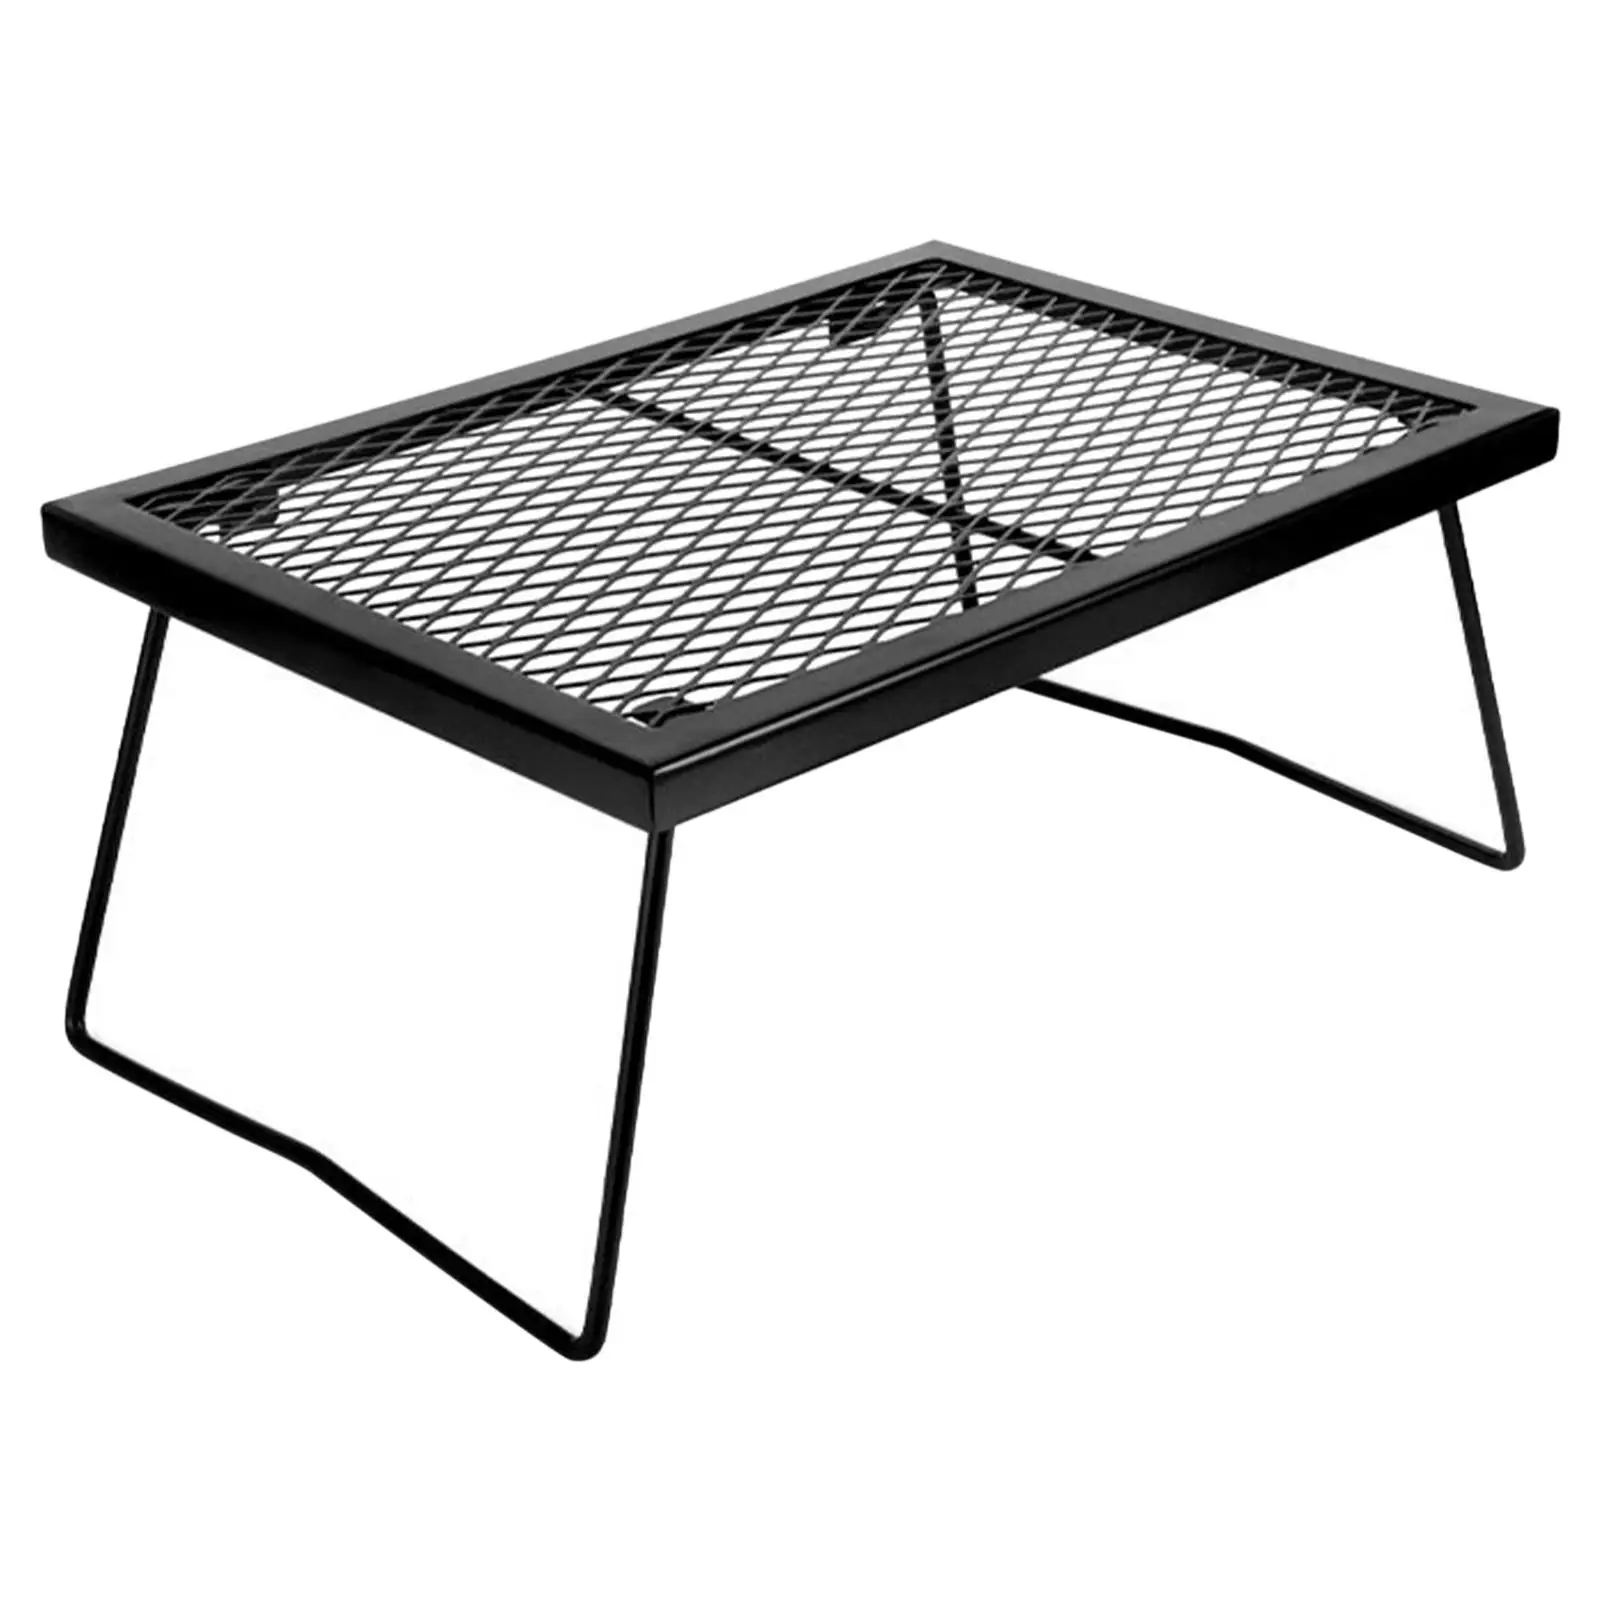 Poring BBQ Table Grill Plate Outdoor Folding Rack for Camping Beach Outdoor Backyard